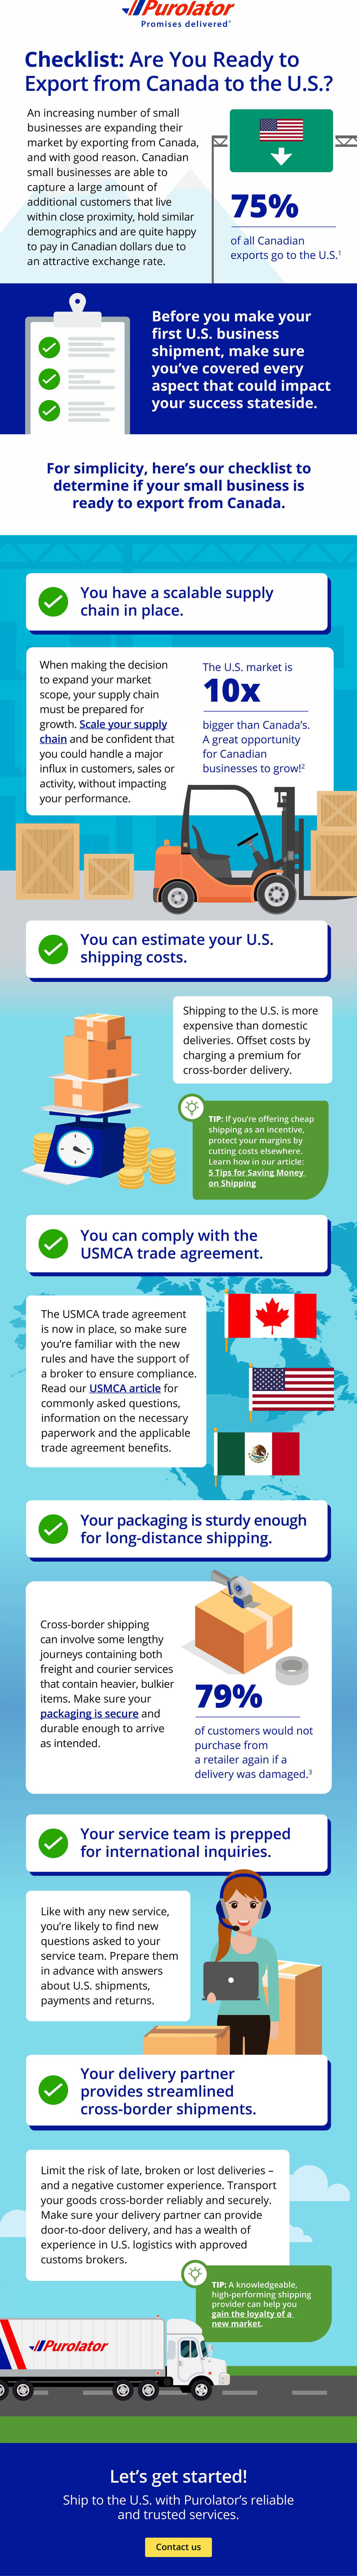 Purolator checklist: are you ready to export from Canada to the US infogprahic